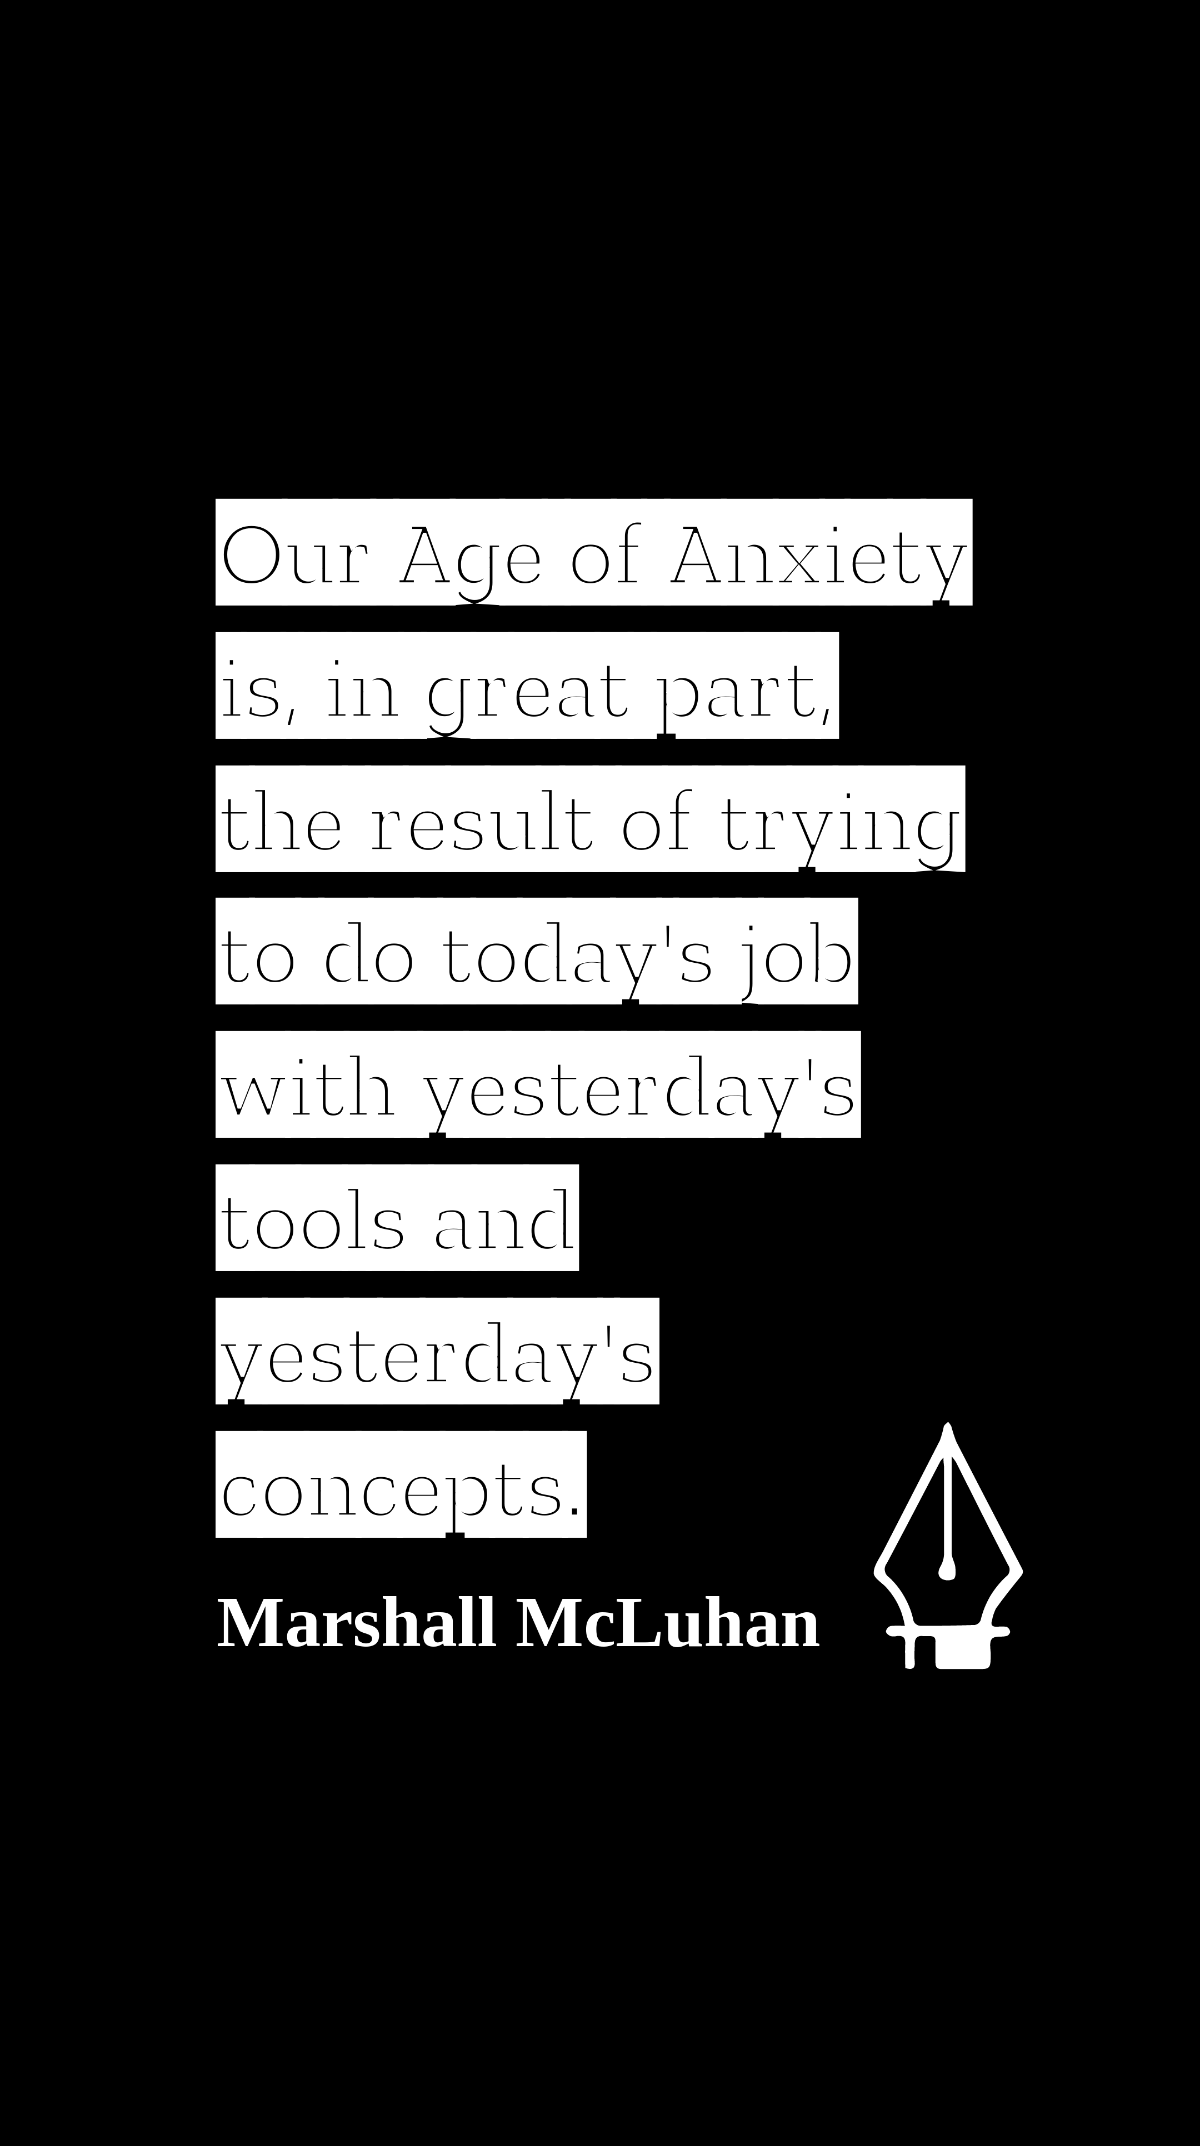 Marshall McLuhan - Our Age of Anxiety is, in great part, the result of trying to do today's job with yesterday's tools and yesterday's concepts. Template